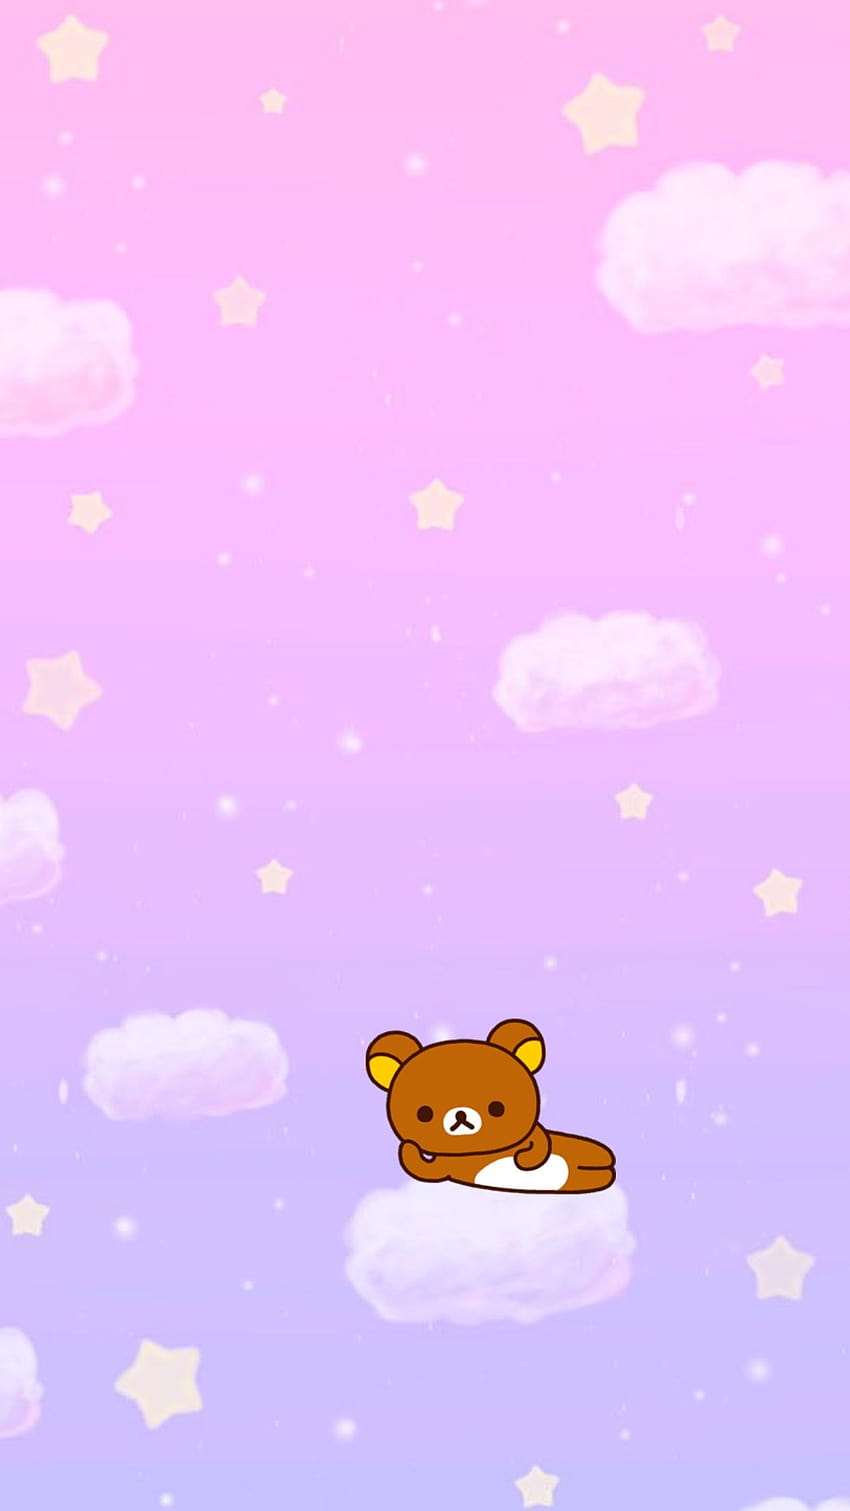 Download Show your love for Kawaii Rilakkuma with this adorable wallpaper!  Wallpaper | Wallpapers.com